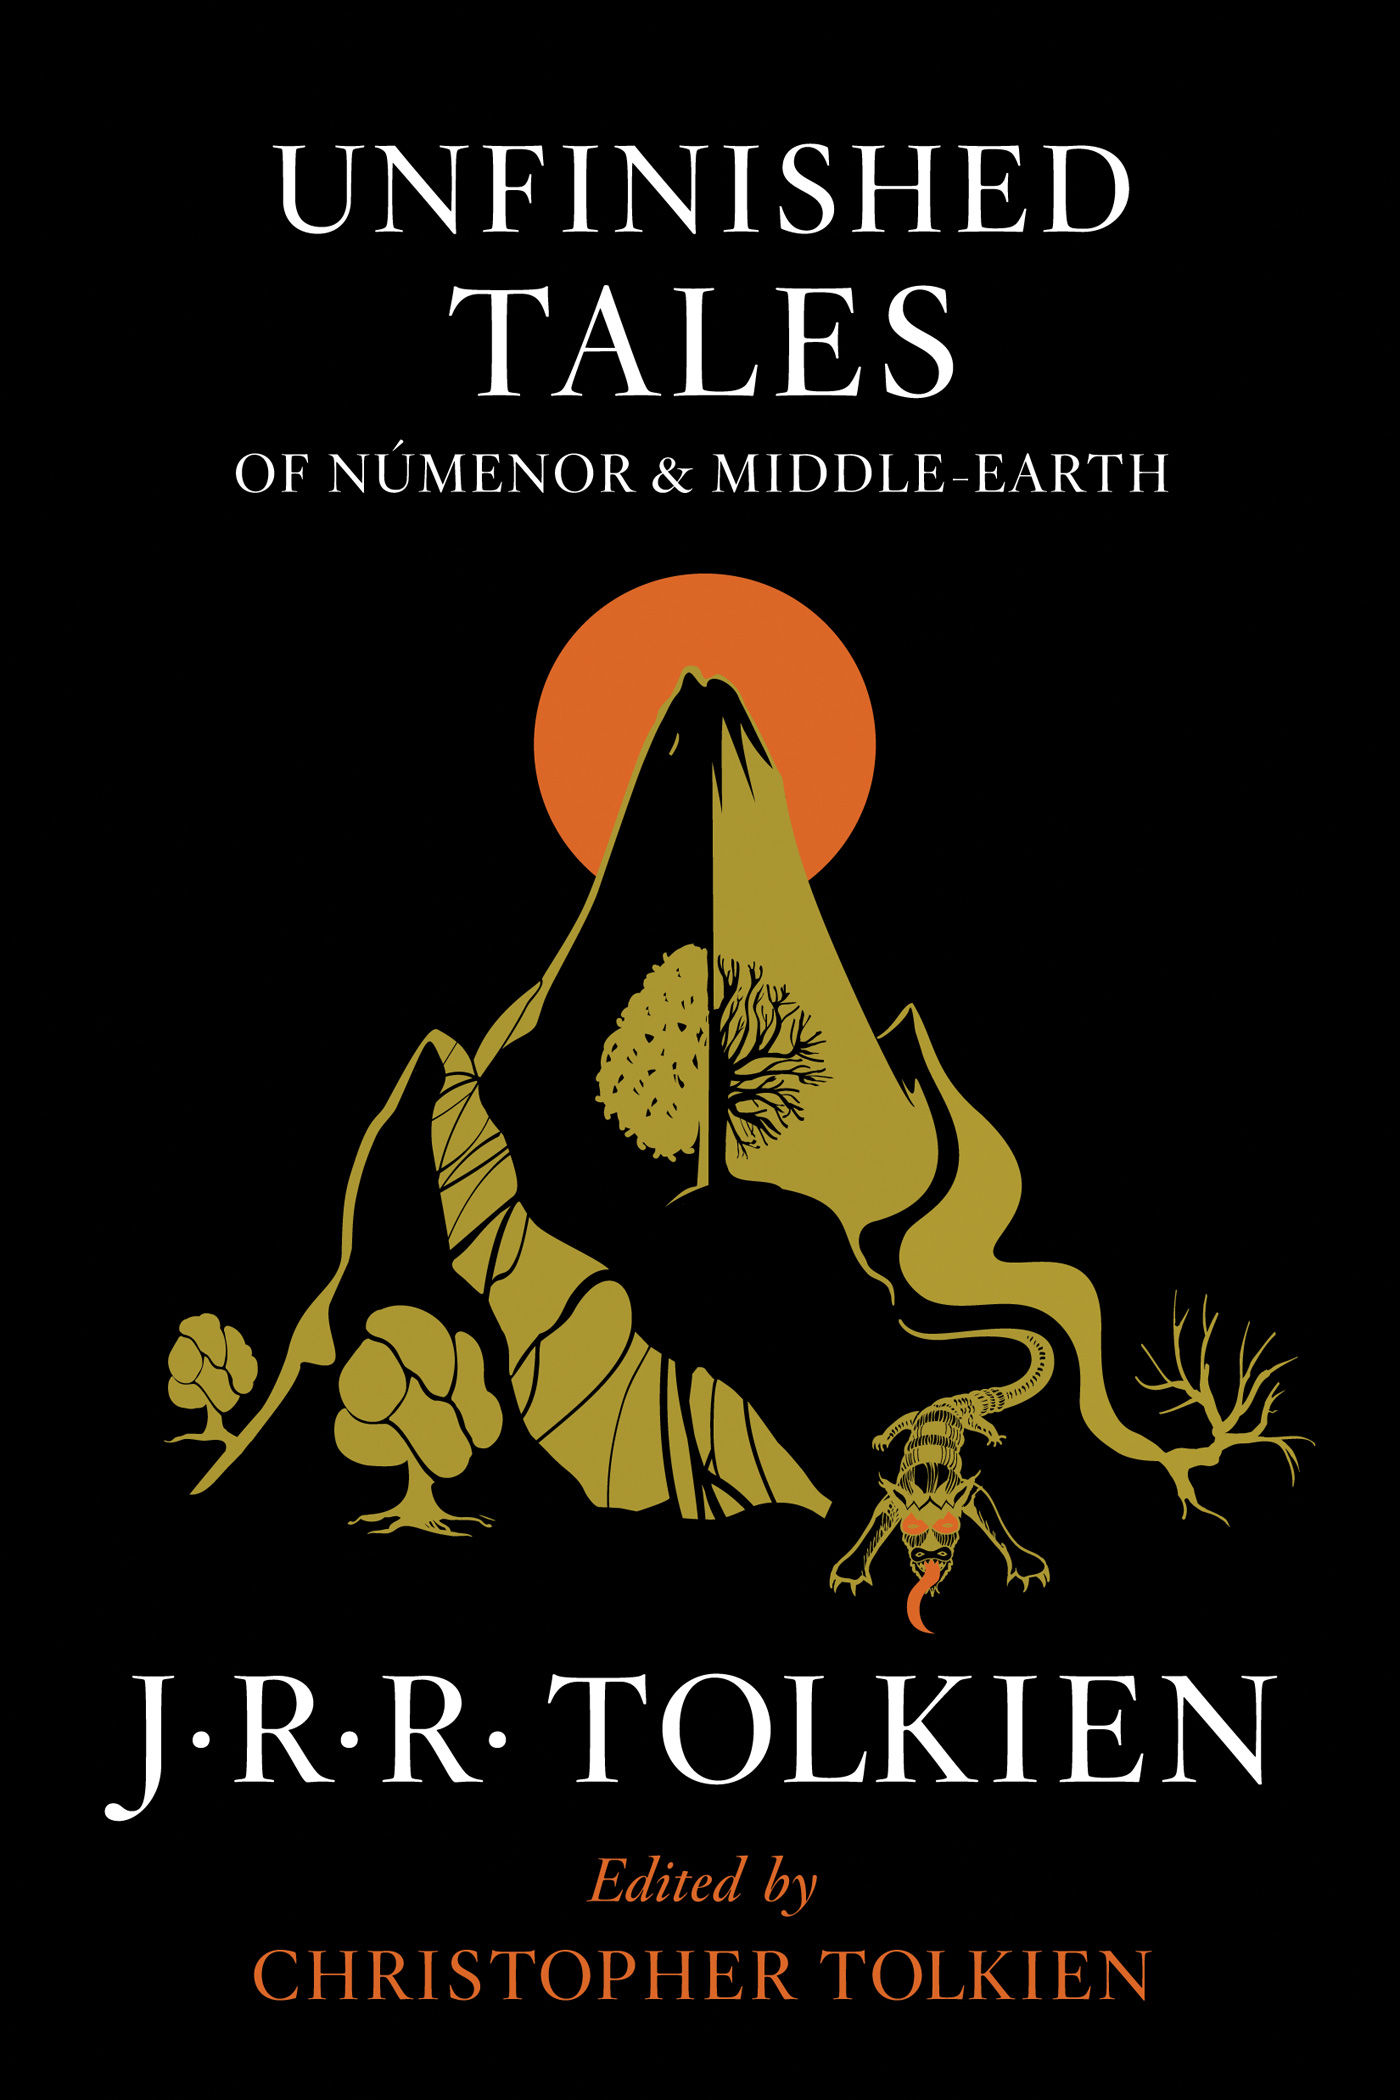 Unfinished Tales Of Númenor And Middle-Earth by J.R.R. Tolkien